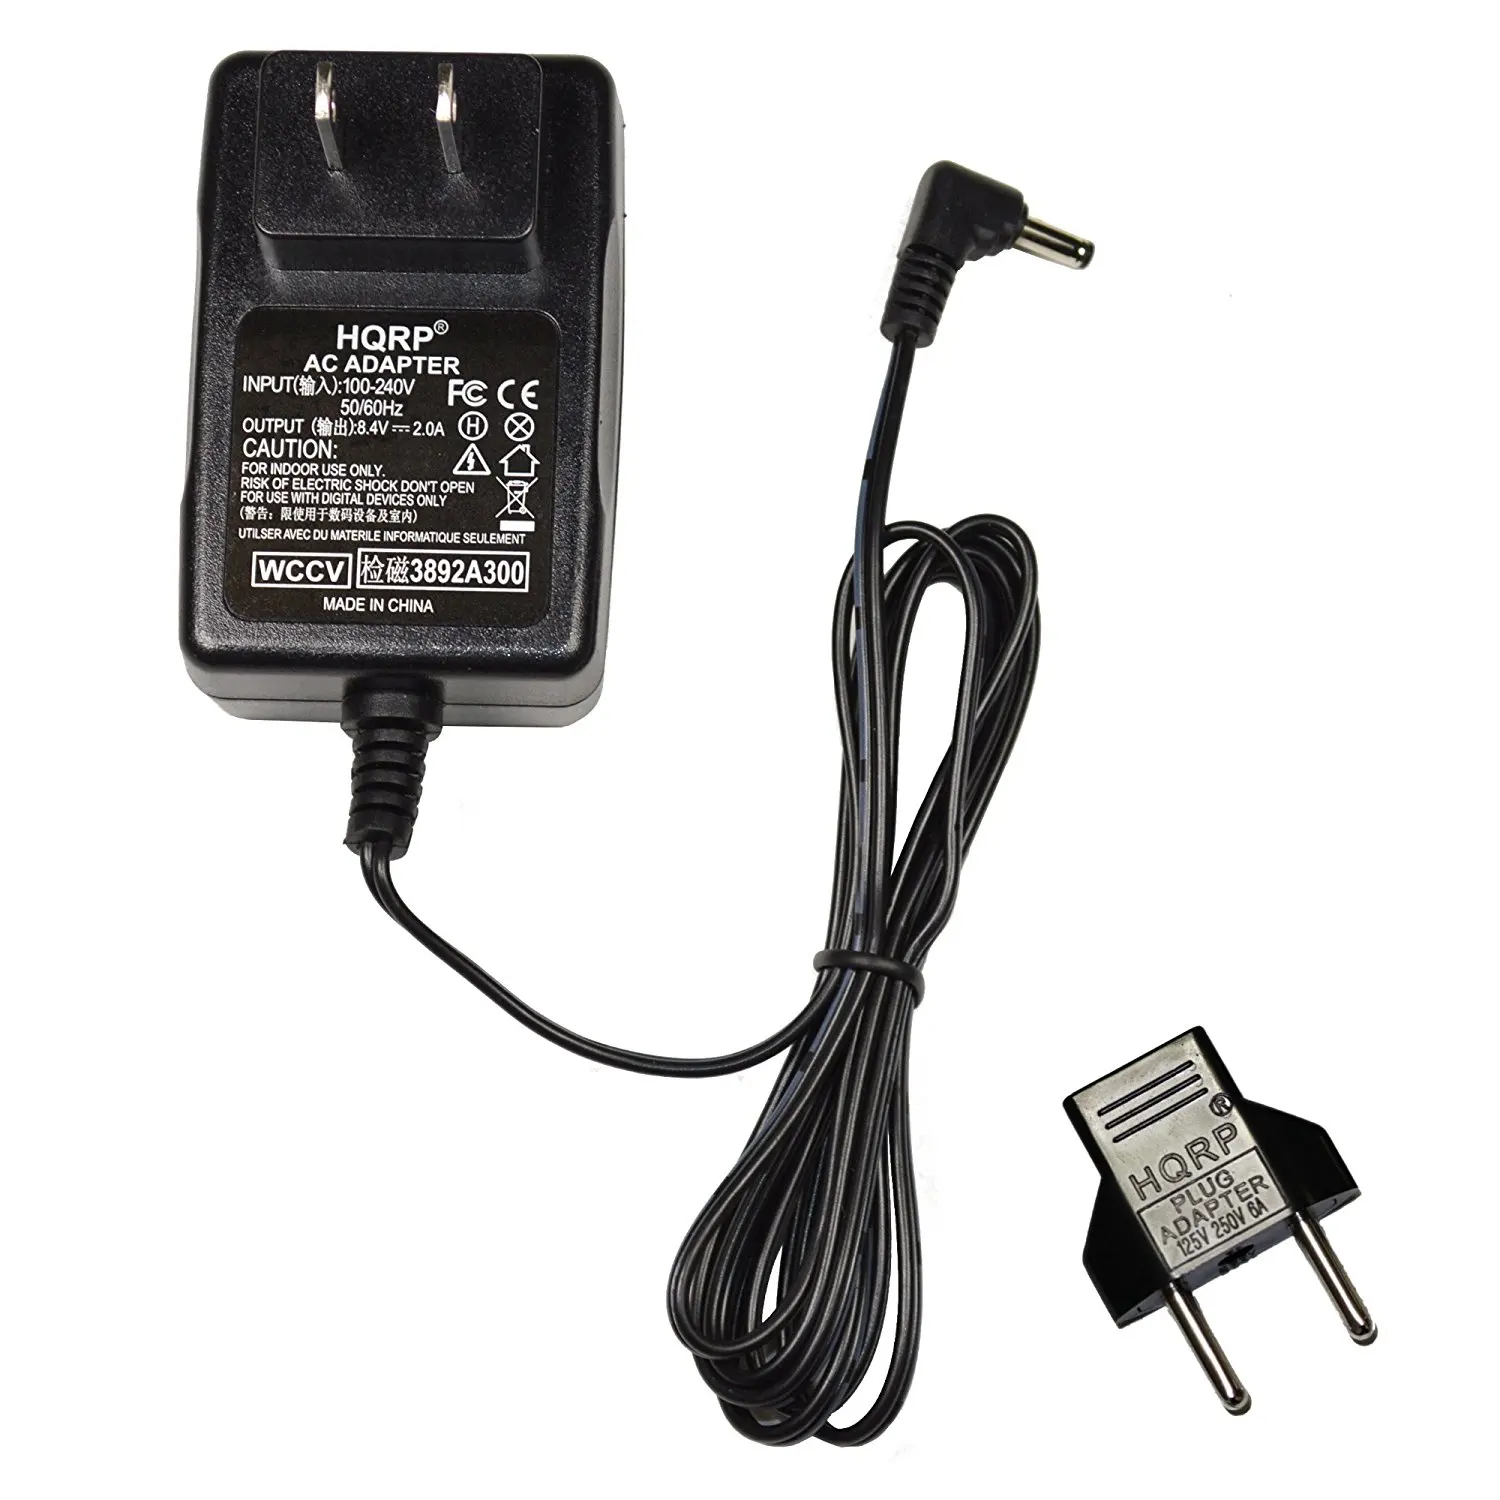 HQRP Replacement AC Adapter//Charger for Canon VIXIA HFS10 HFS100 HF20 HF200 Digital Camcorder with USA Cord /& Euro Plug Adapter